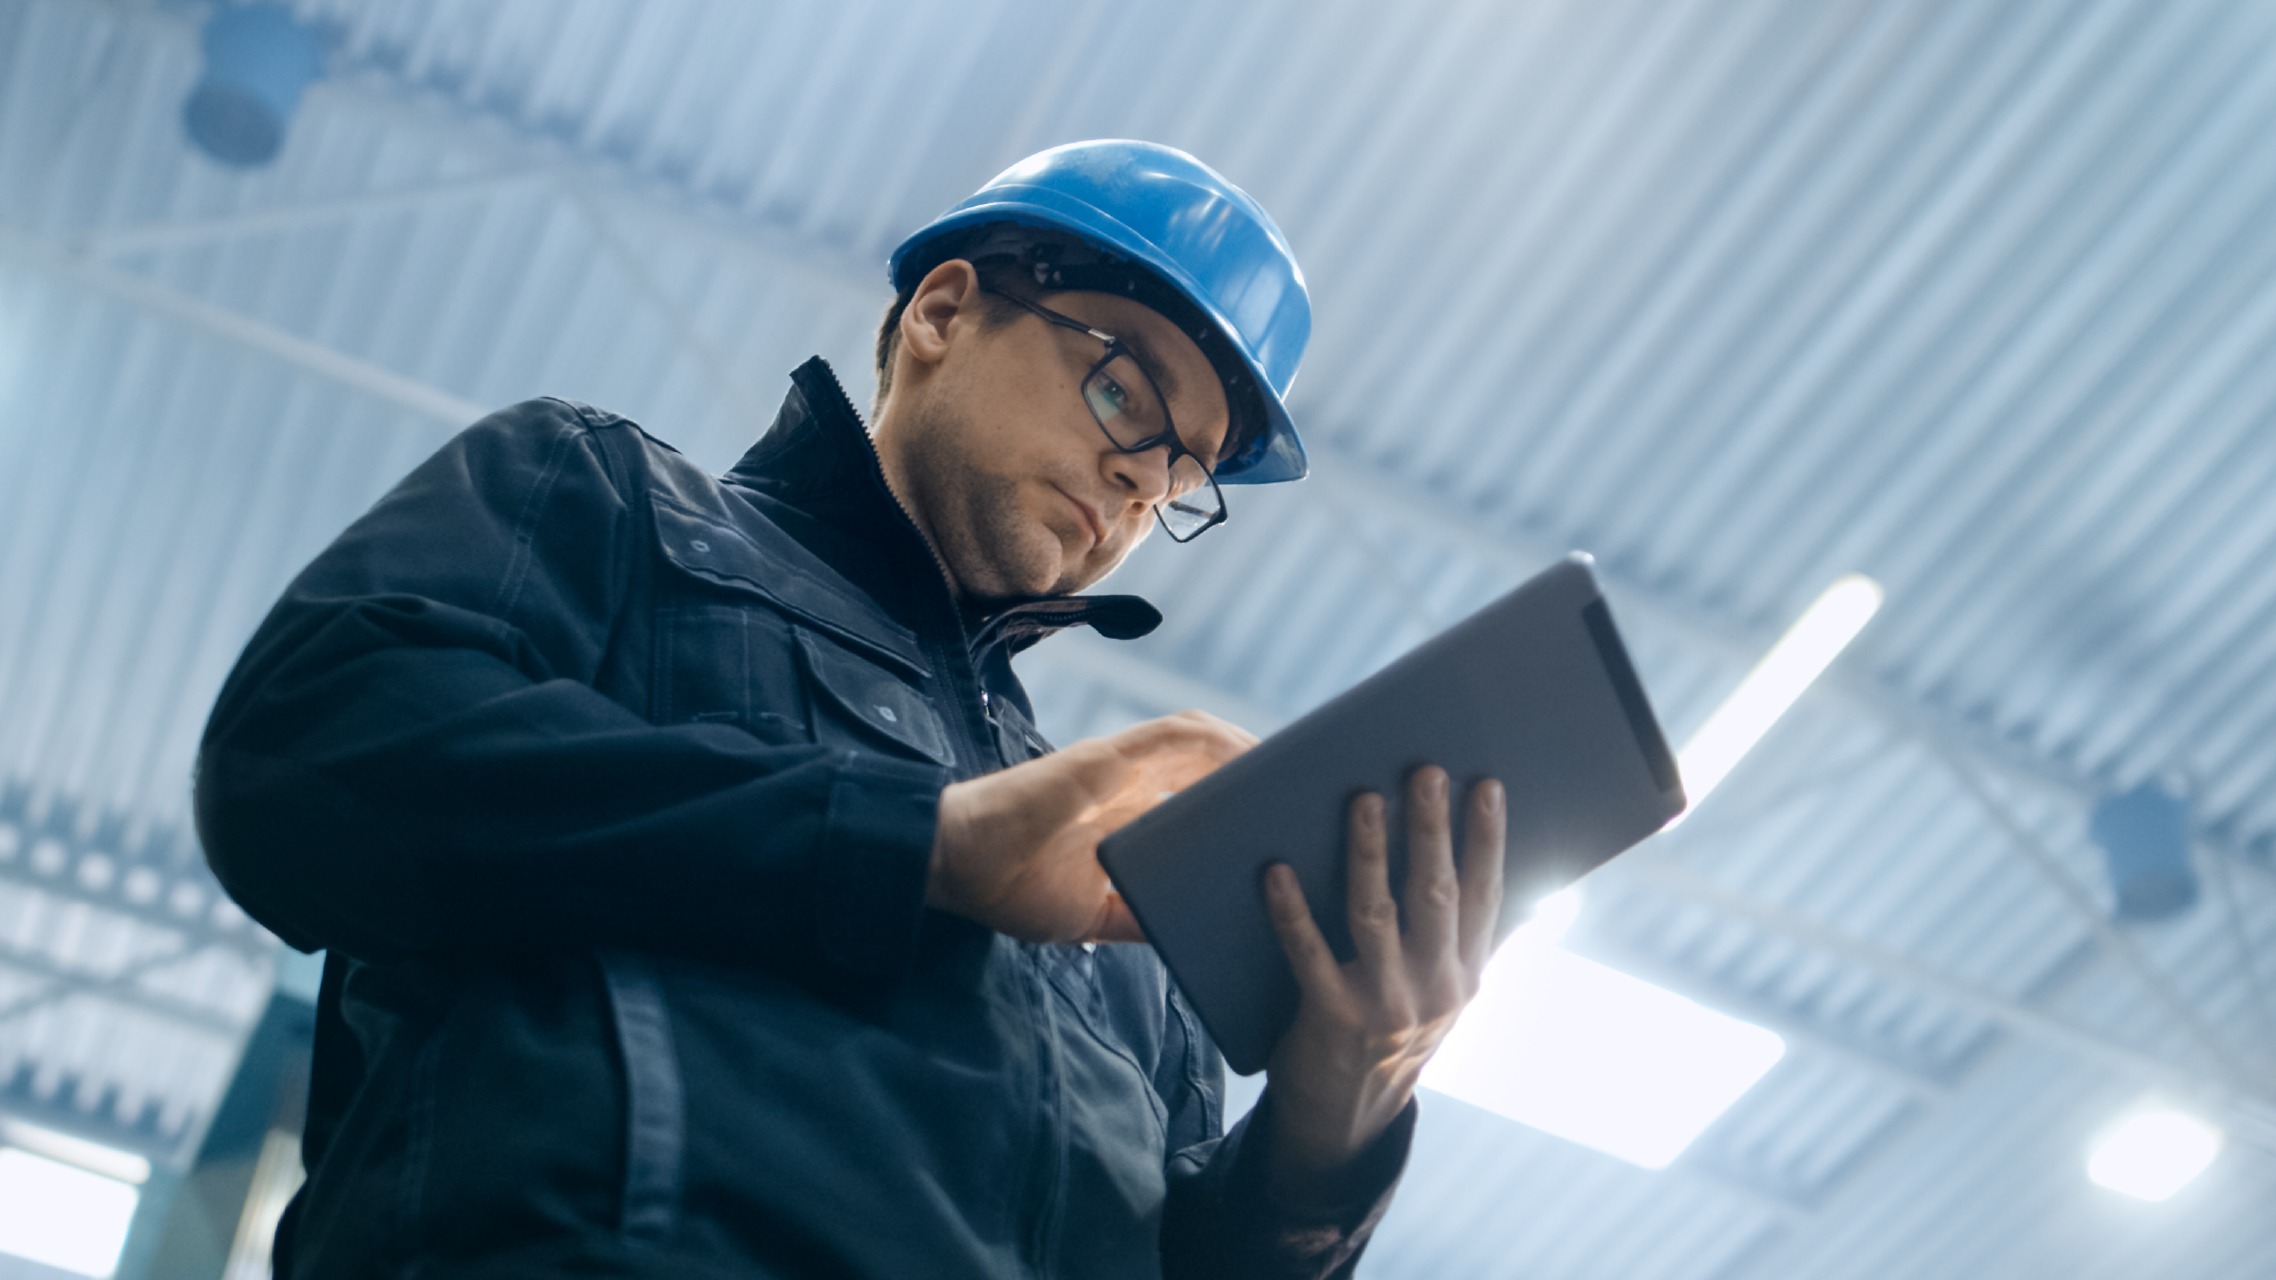 An inspector wearing a hard hat and holding a tablet